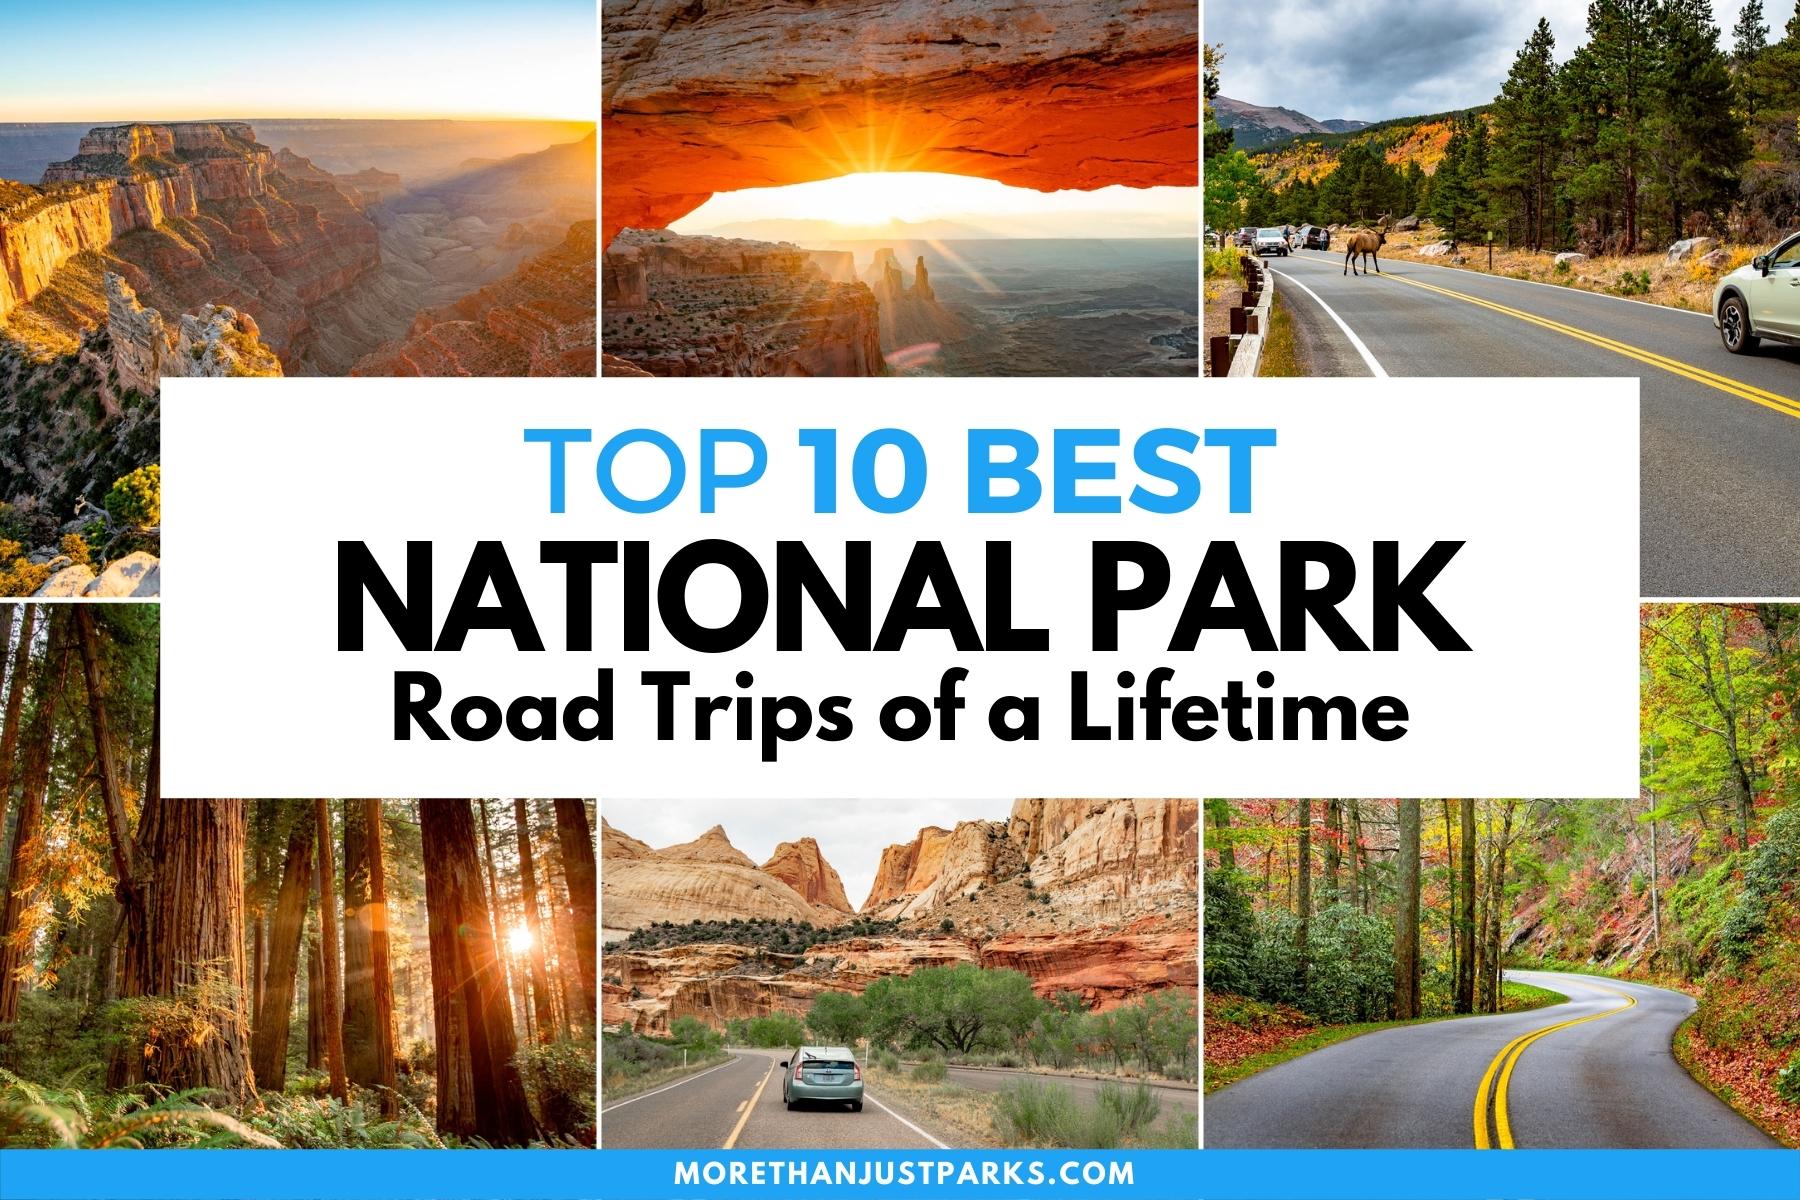 10 BEST National Park Road Trips (+ Stops You’ll Love) 2022